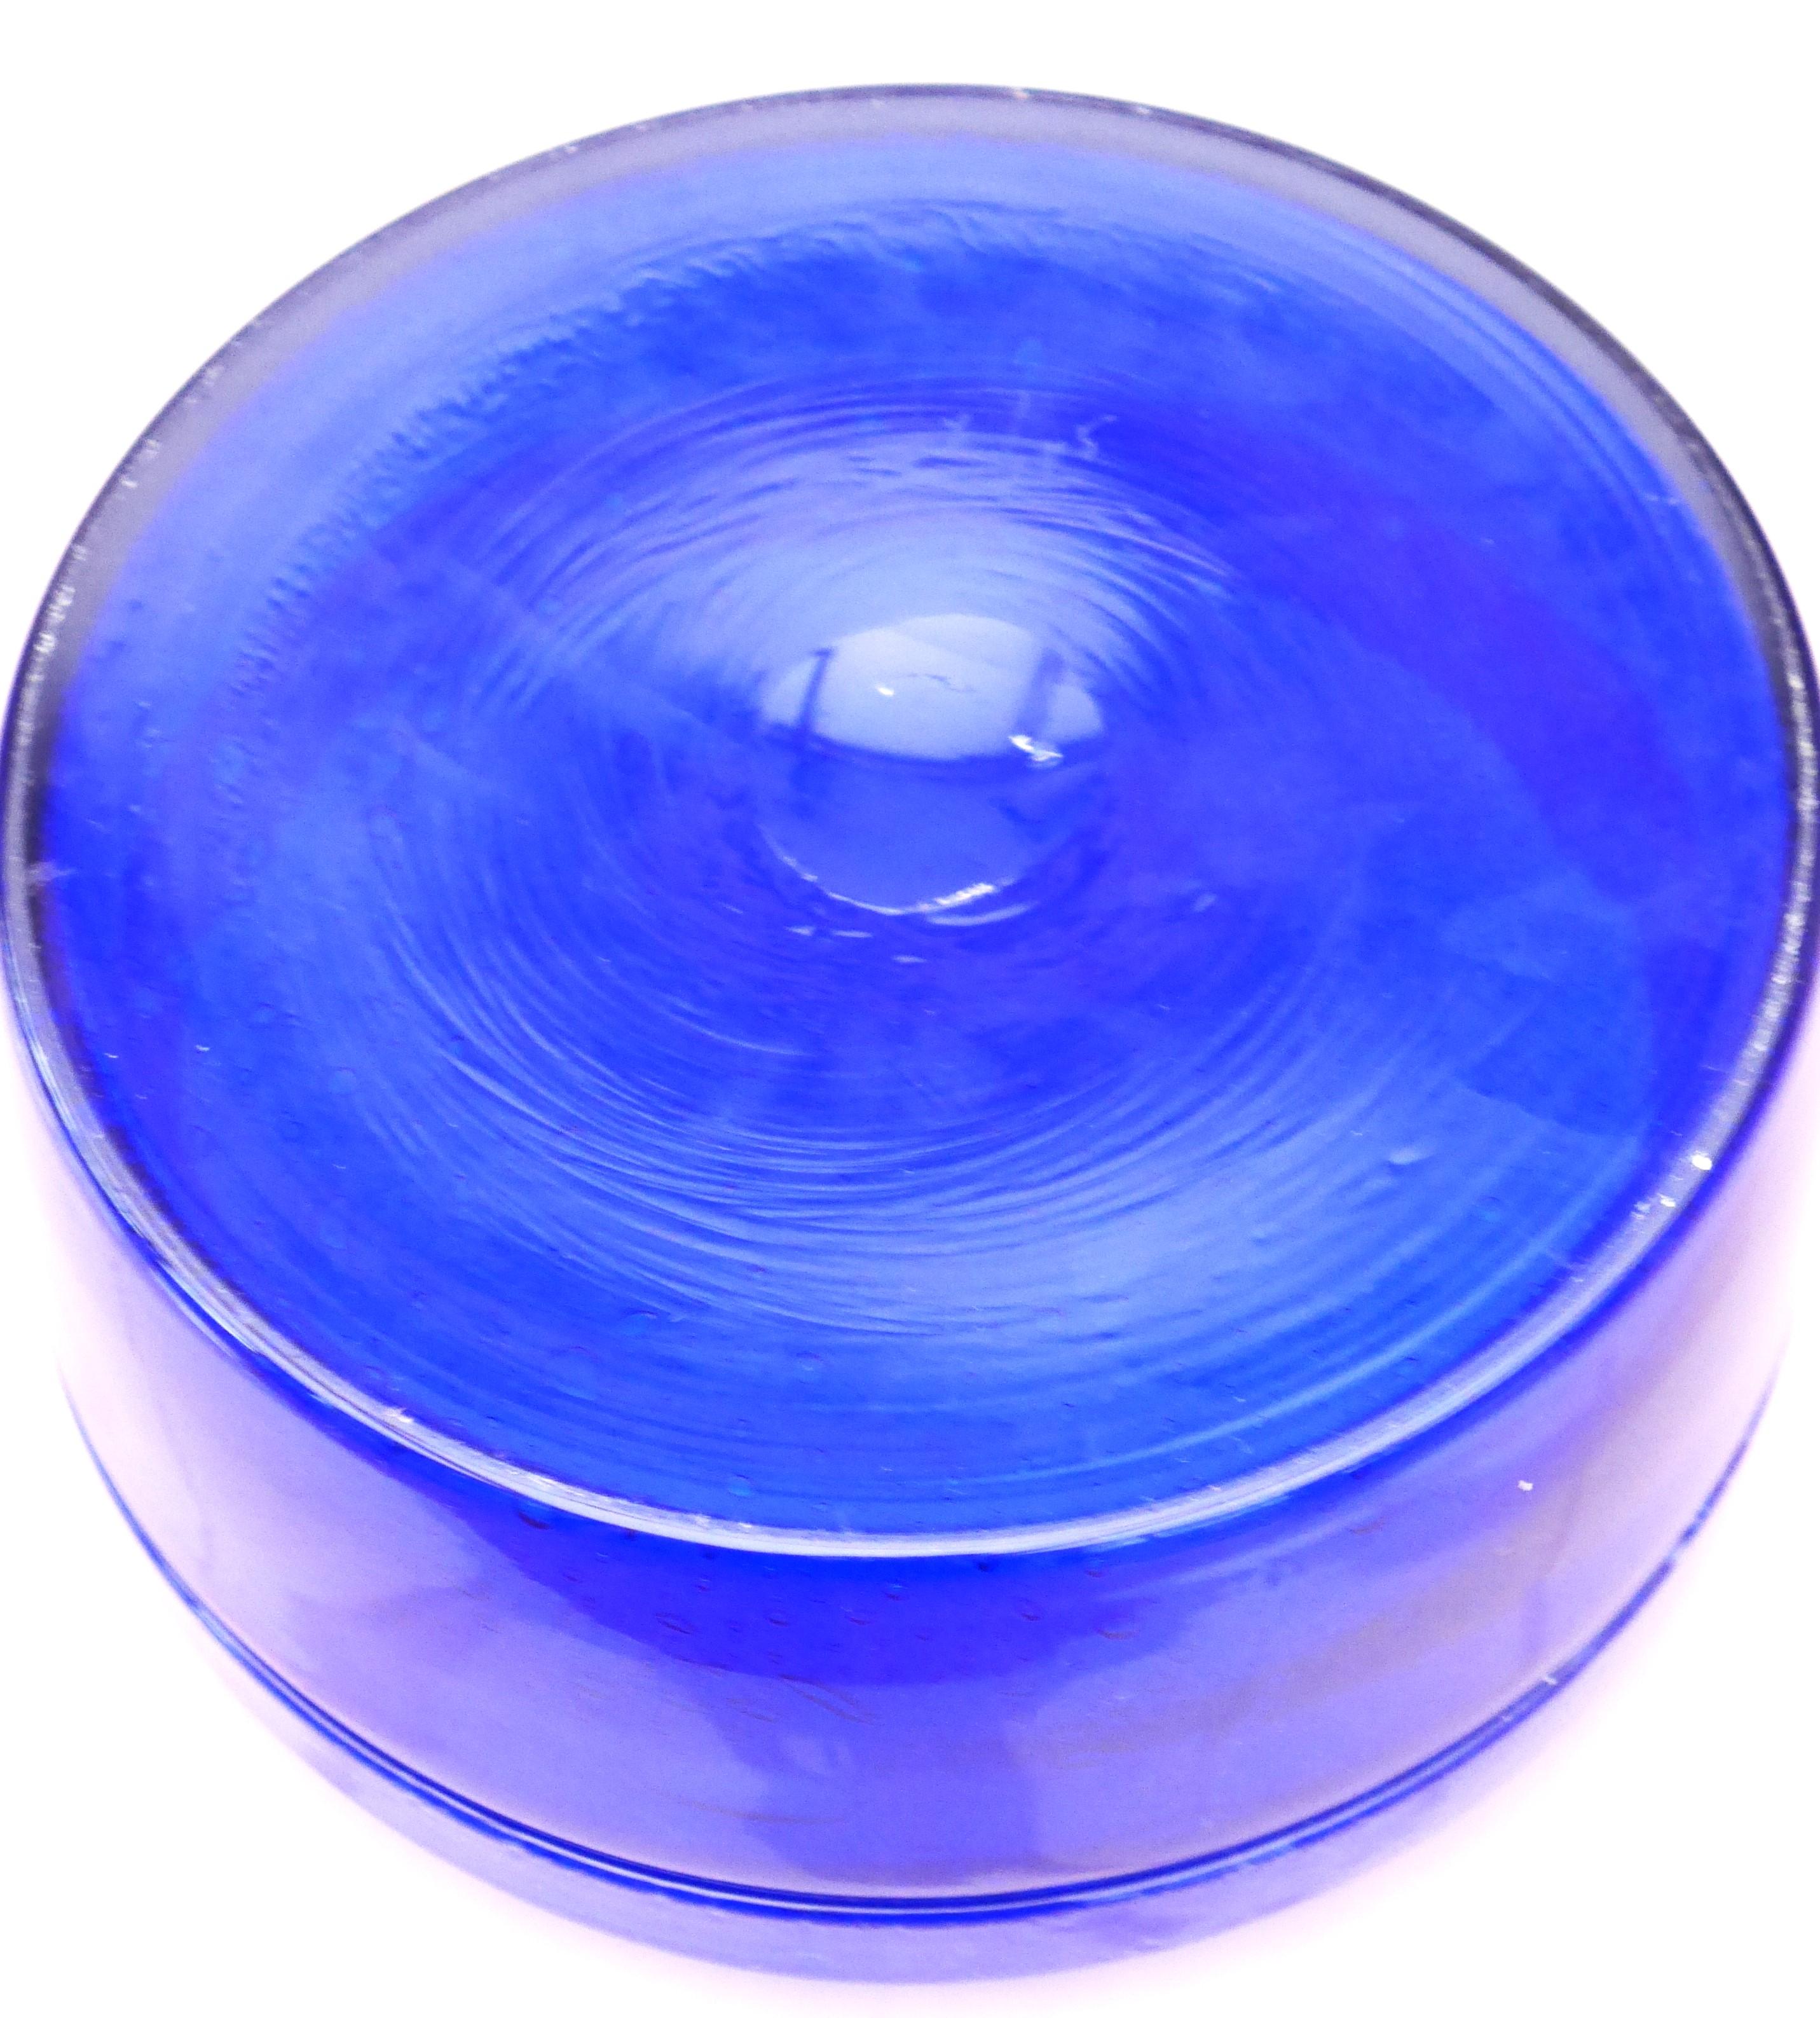 Late 20th Century Mid-century modern signed art glass bowl in a bright blue. Erik Höglund Boda. For Sale